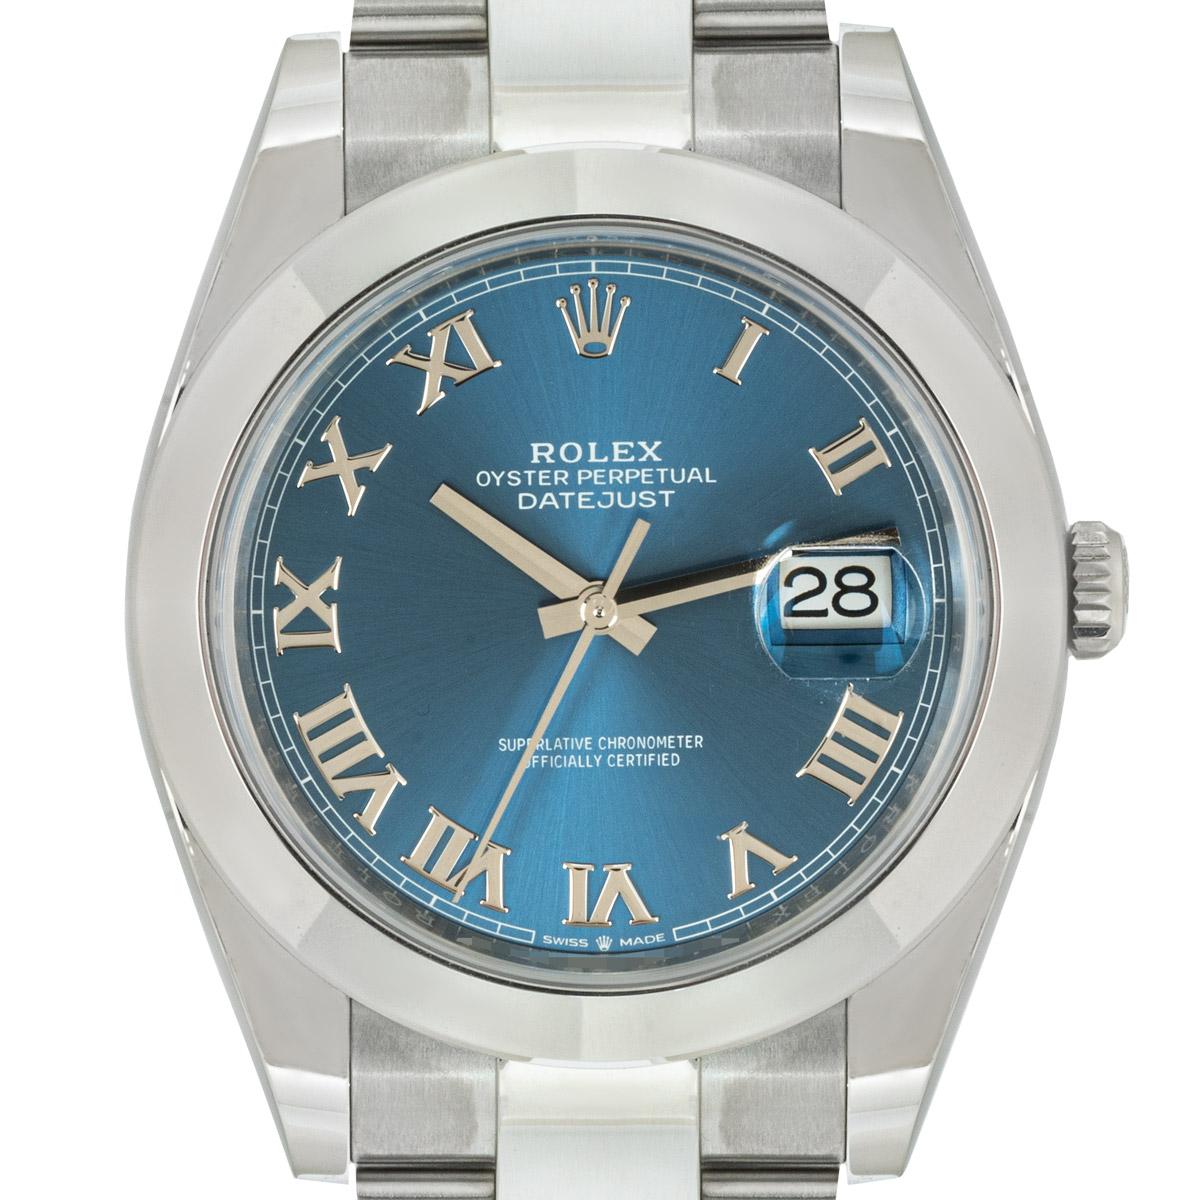 A men's Datejust crafted in Oystersteel by Rolex. Featuring a stunning blue dial with applied roman numerals and a fixed stainless steel bezel. Fitted with a scratch-resistant sapphire crystal and powered by a self-winding automatic movement. The